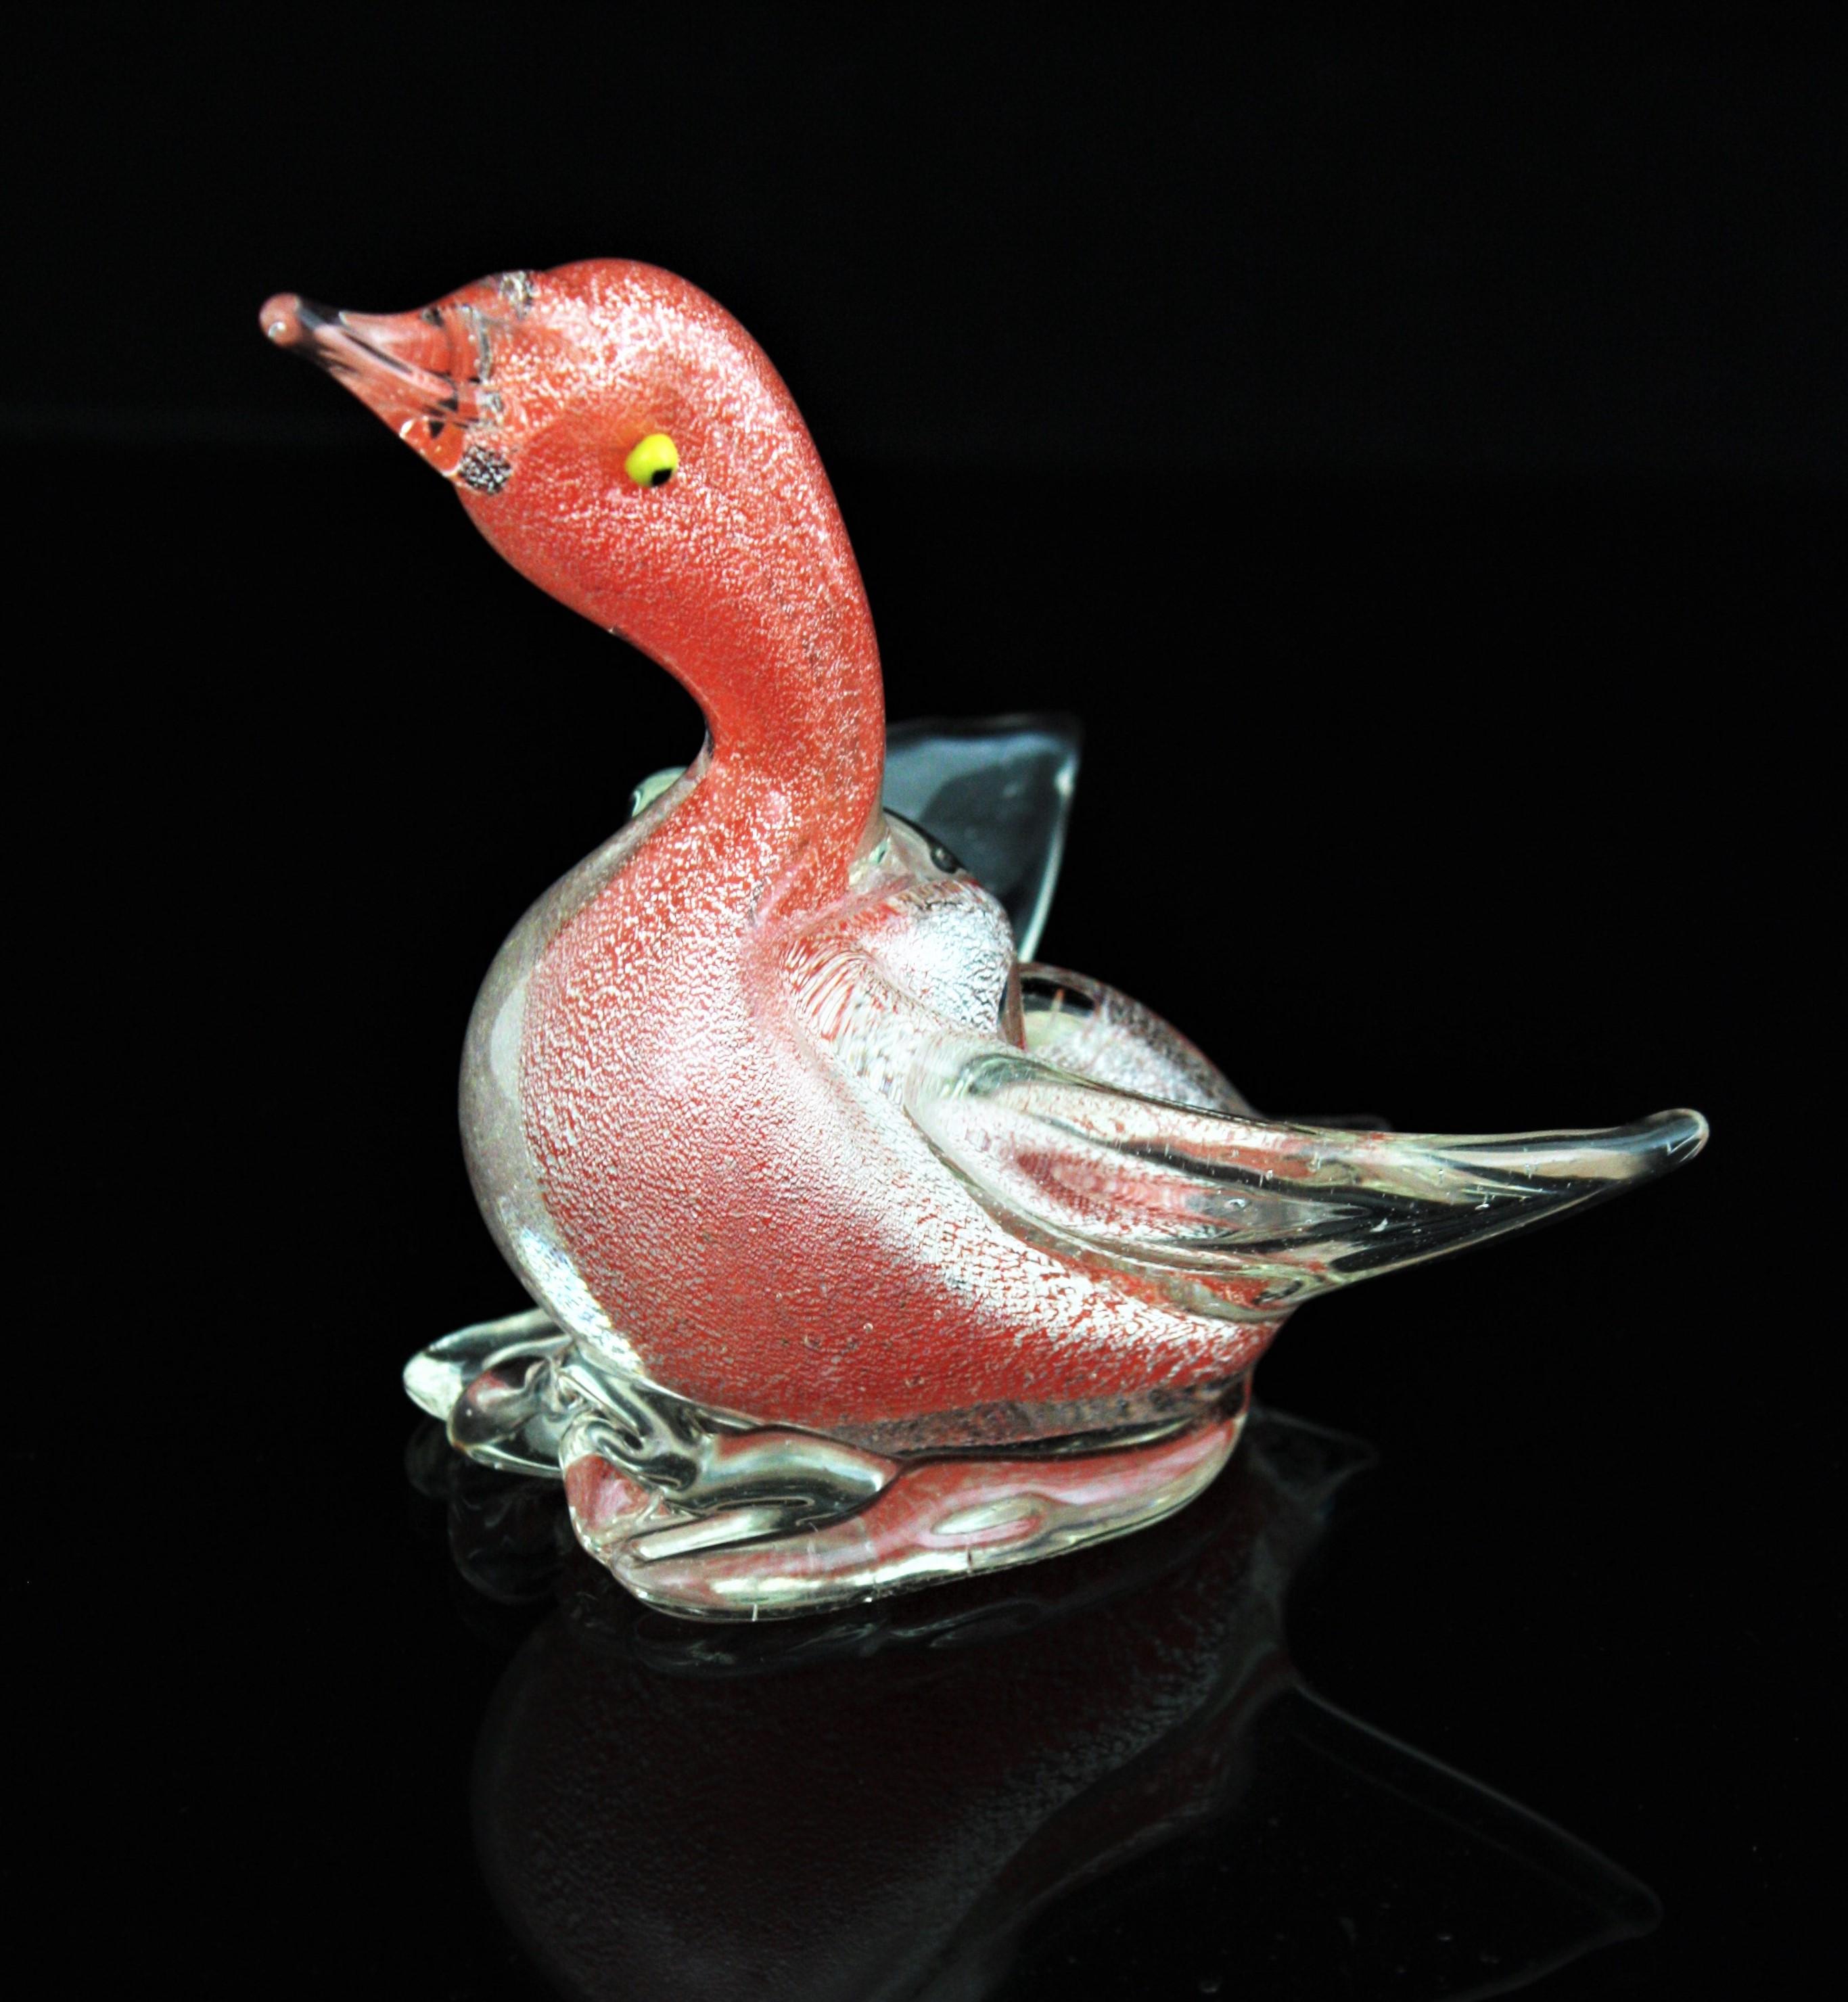 Small hand blown Murano glass open wings duck / bird figurine with silver flecks. Attributed to Archimede Seguso, Italy 1950s.
Cute open wings standing up duck figure. Vibrant orange glass submerged into clear glass accented by silver Aventurine